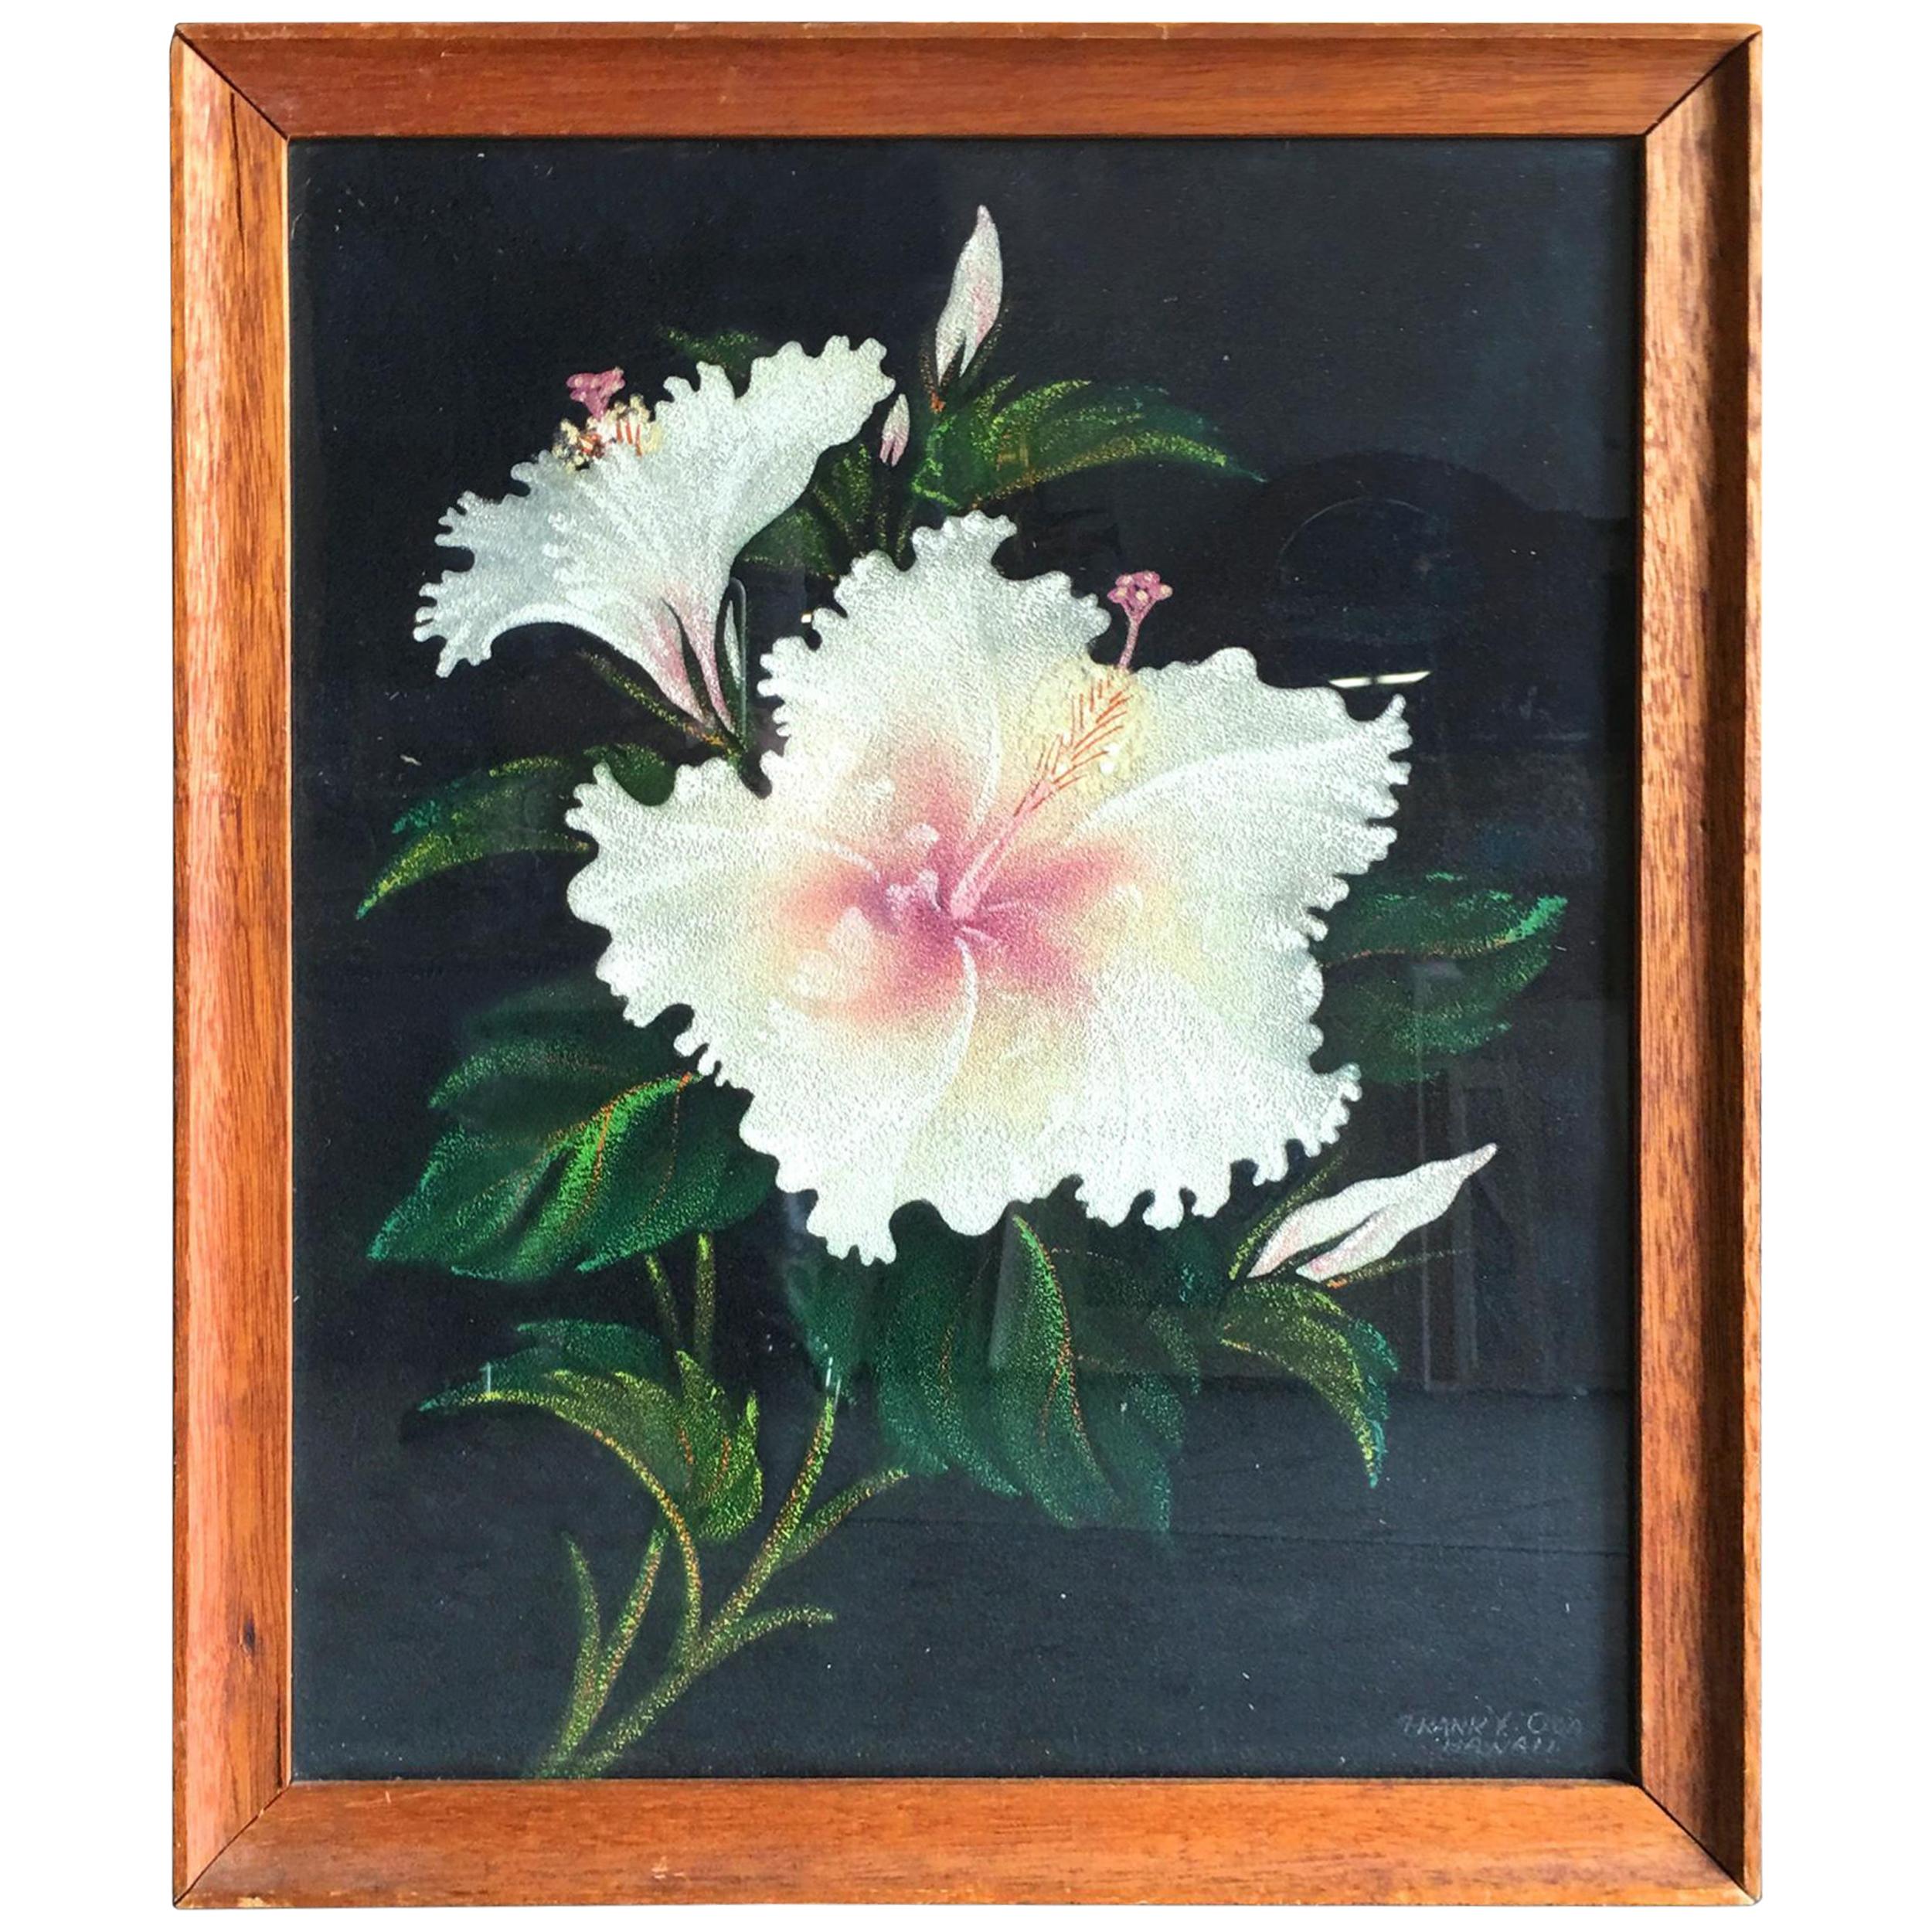 Post War Hawaiian Airbrush Hibiscus Floral on Velvet in Frame, Signed Frank Oda